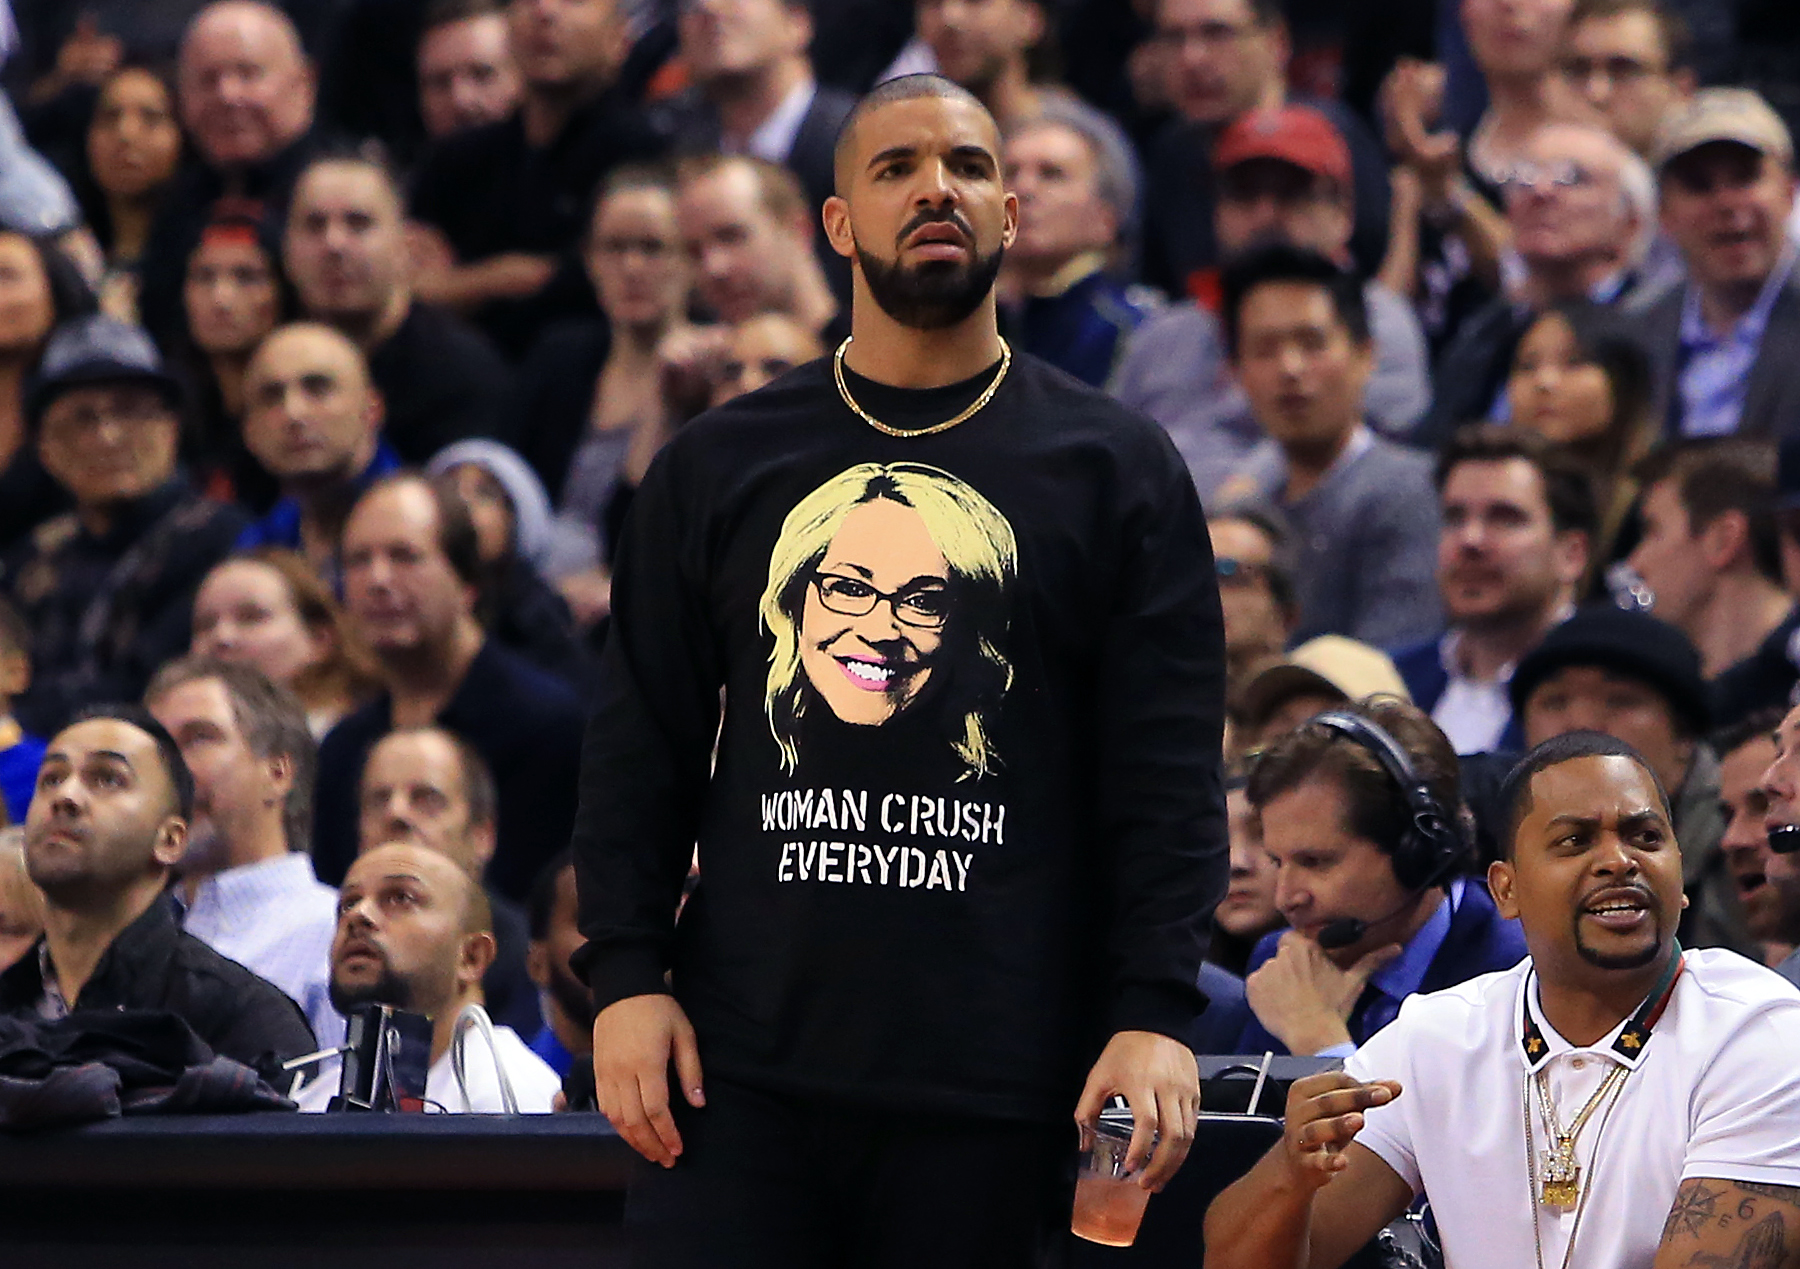 Drake at an NBA game between the Golden State Warriors and the Toronto Raptors at Air Canada Centre on November 16, 2016. (Photo by Vaughn Ridley/Getty)